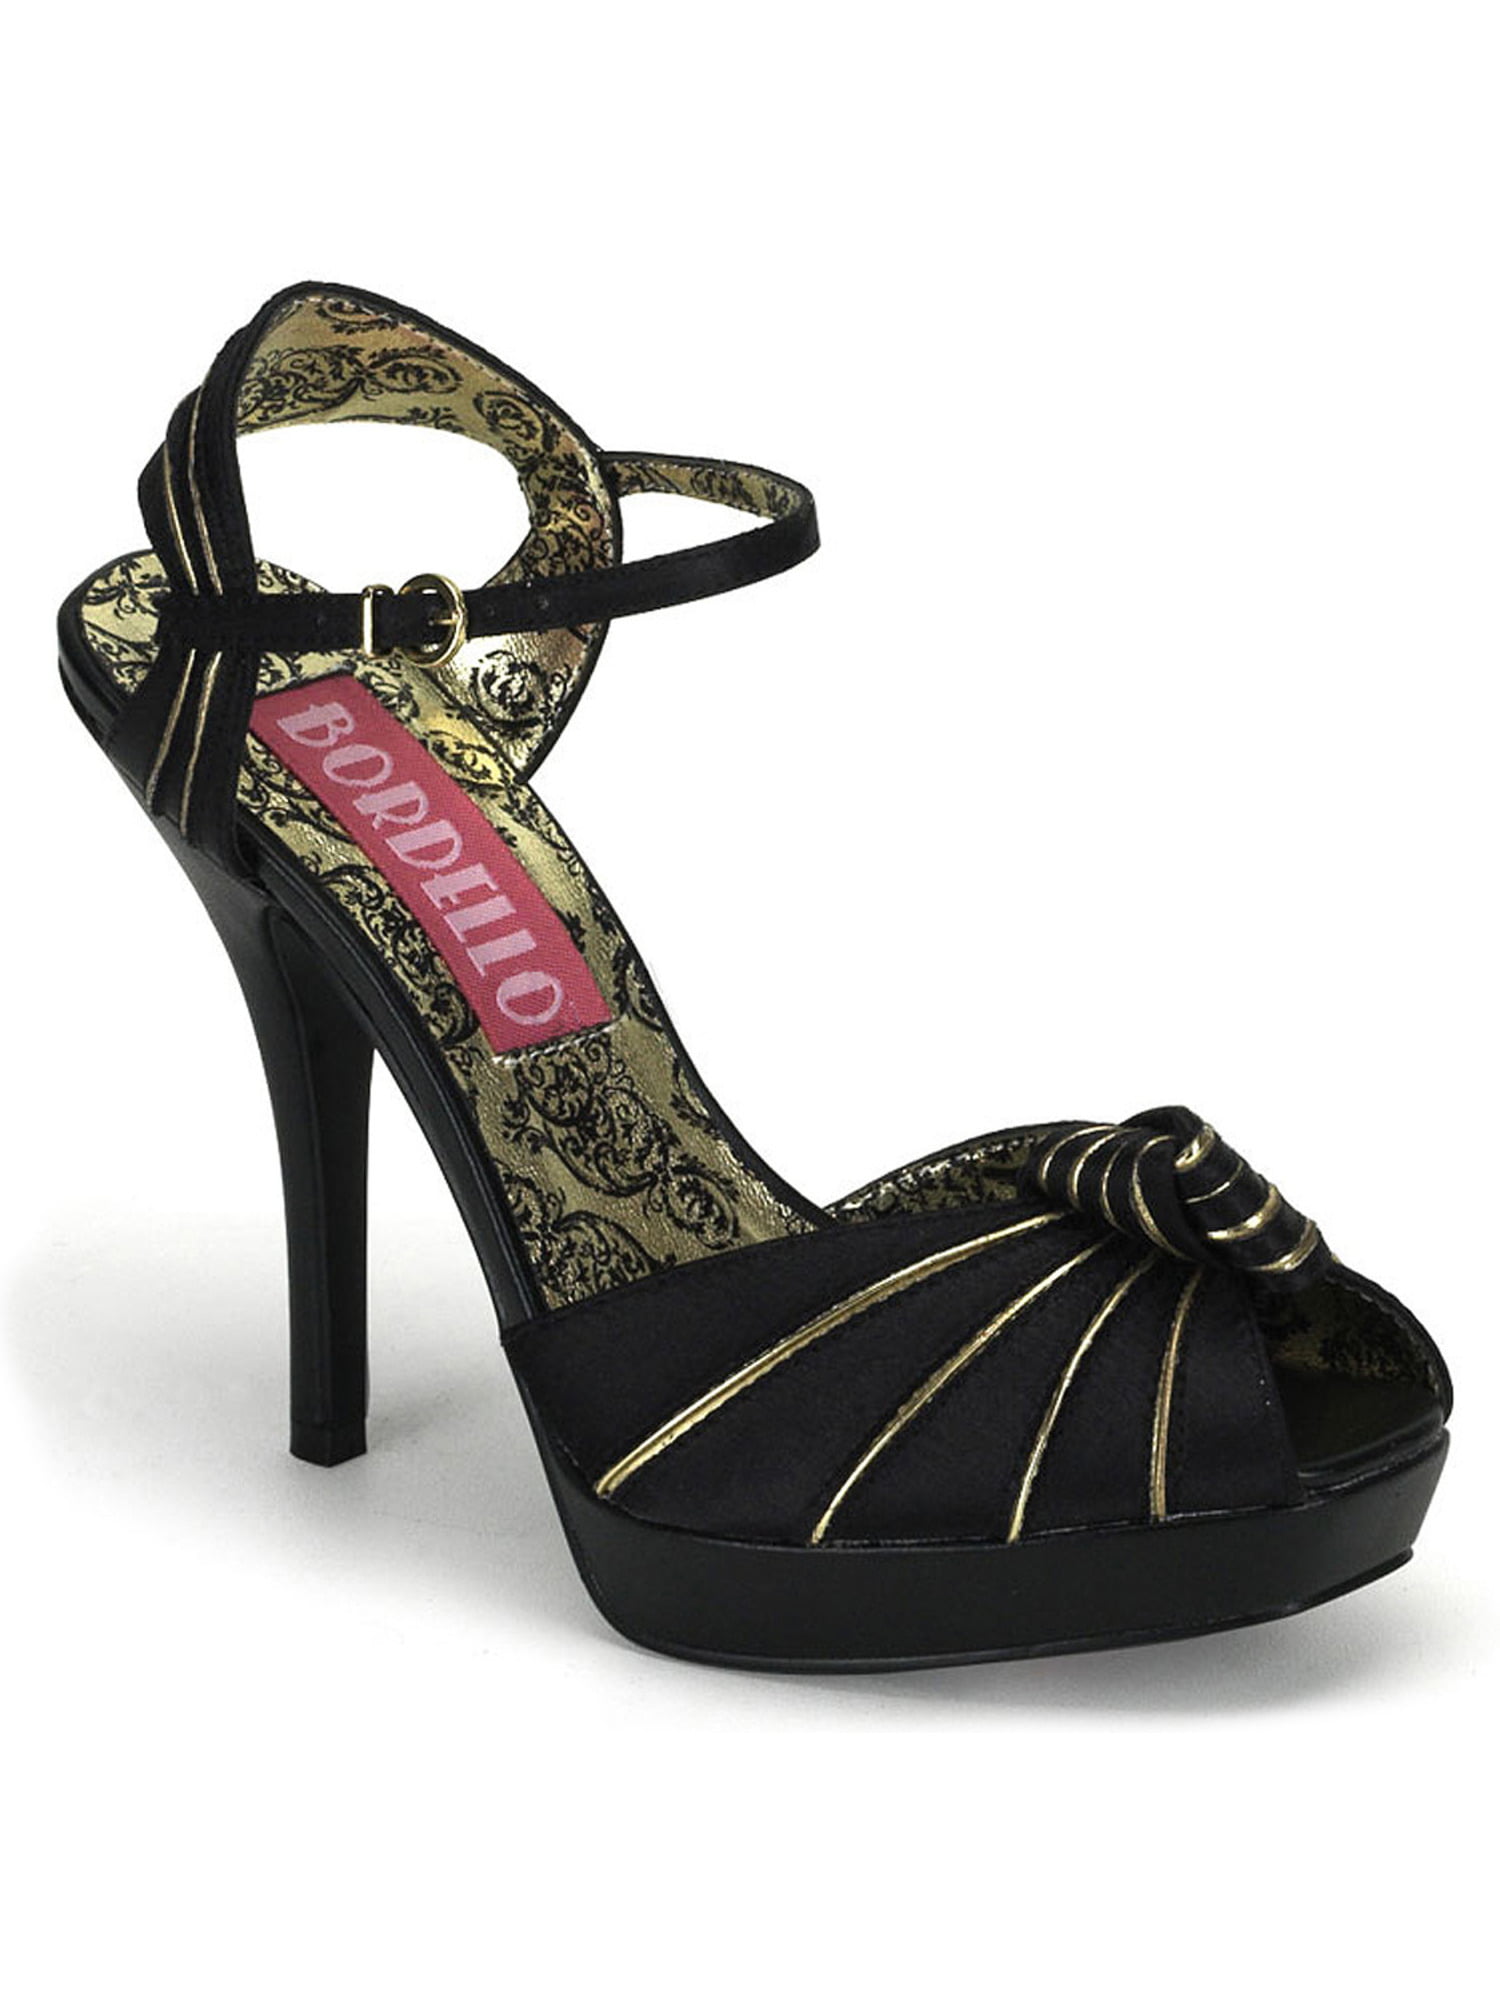 black and gold 3 inch heels